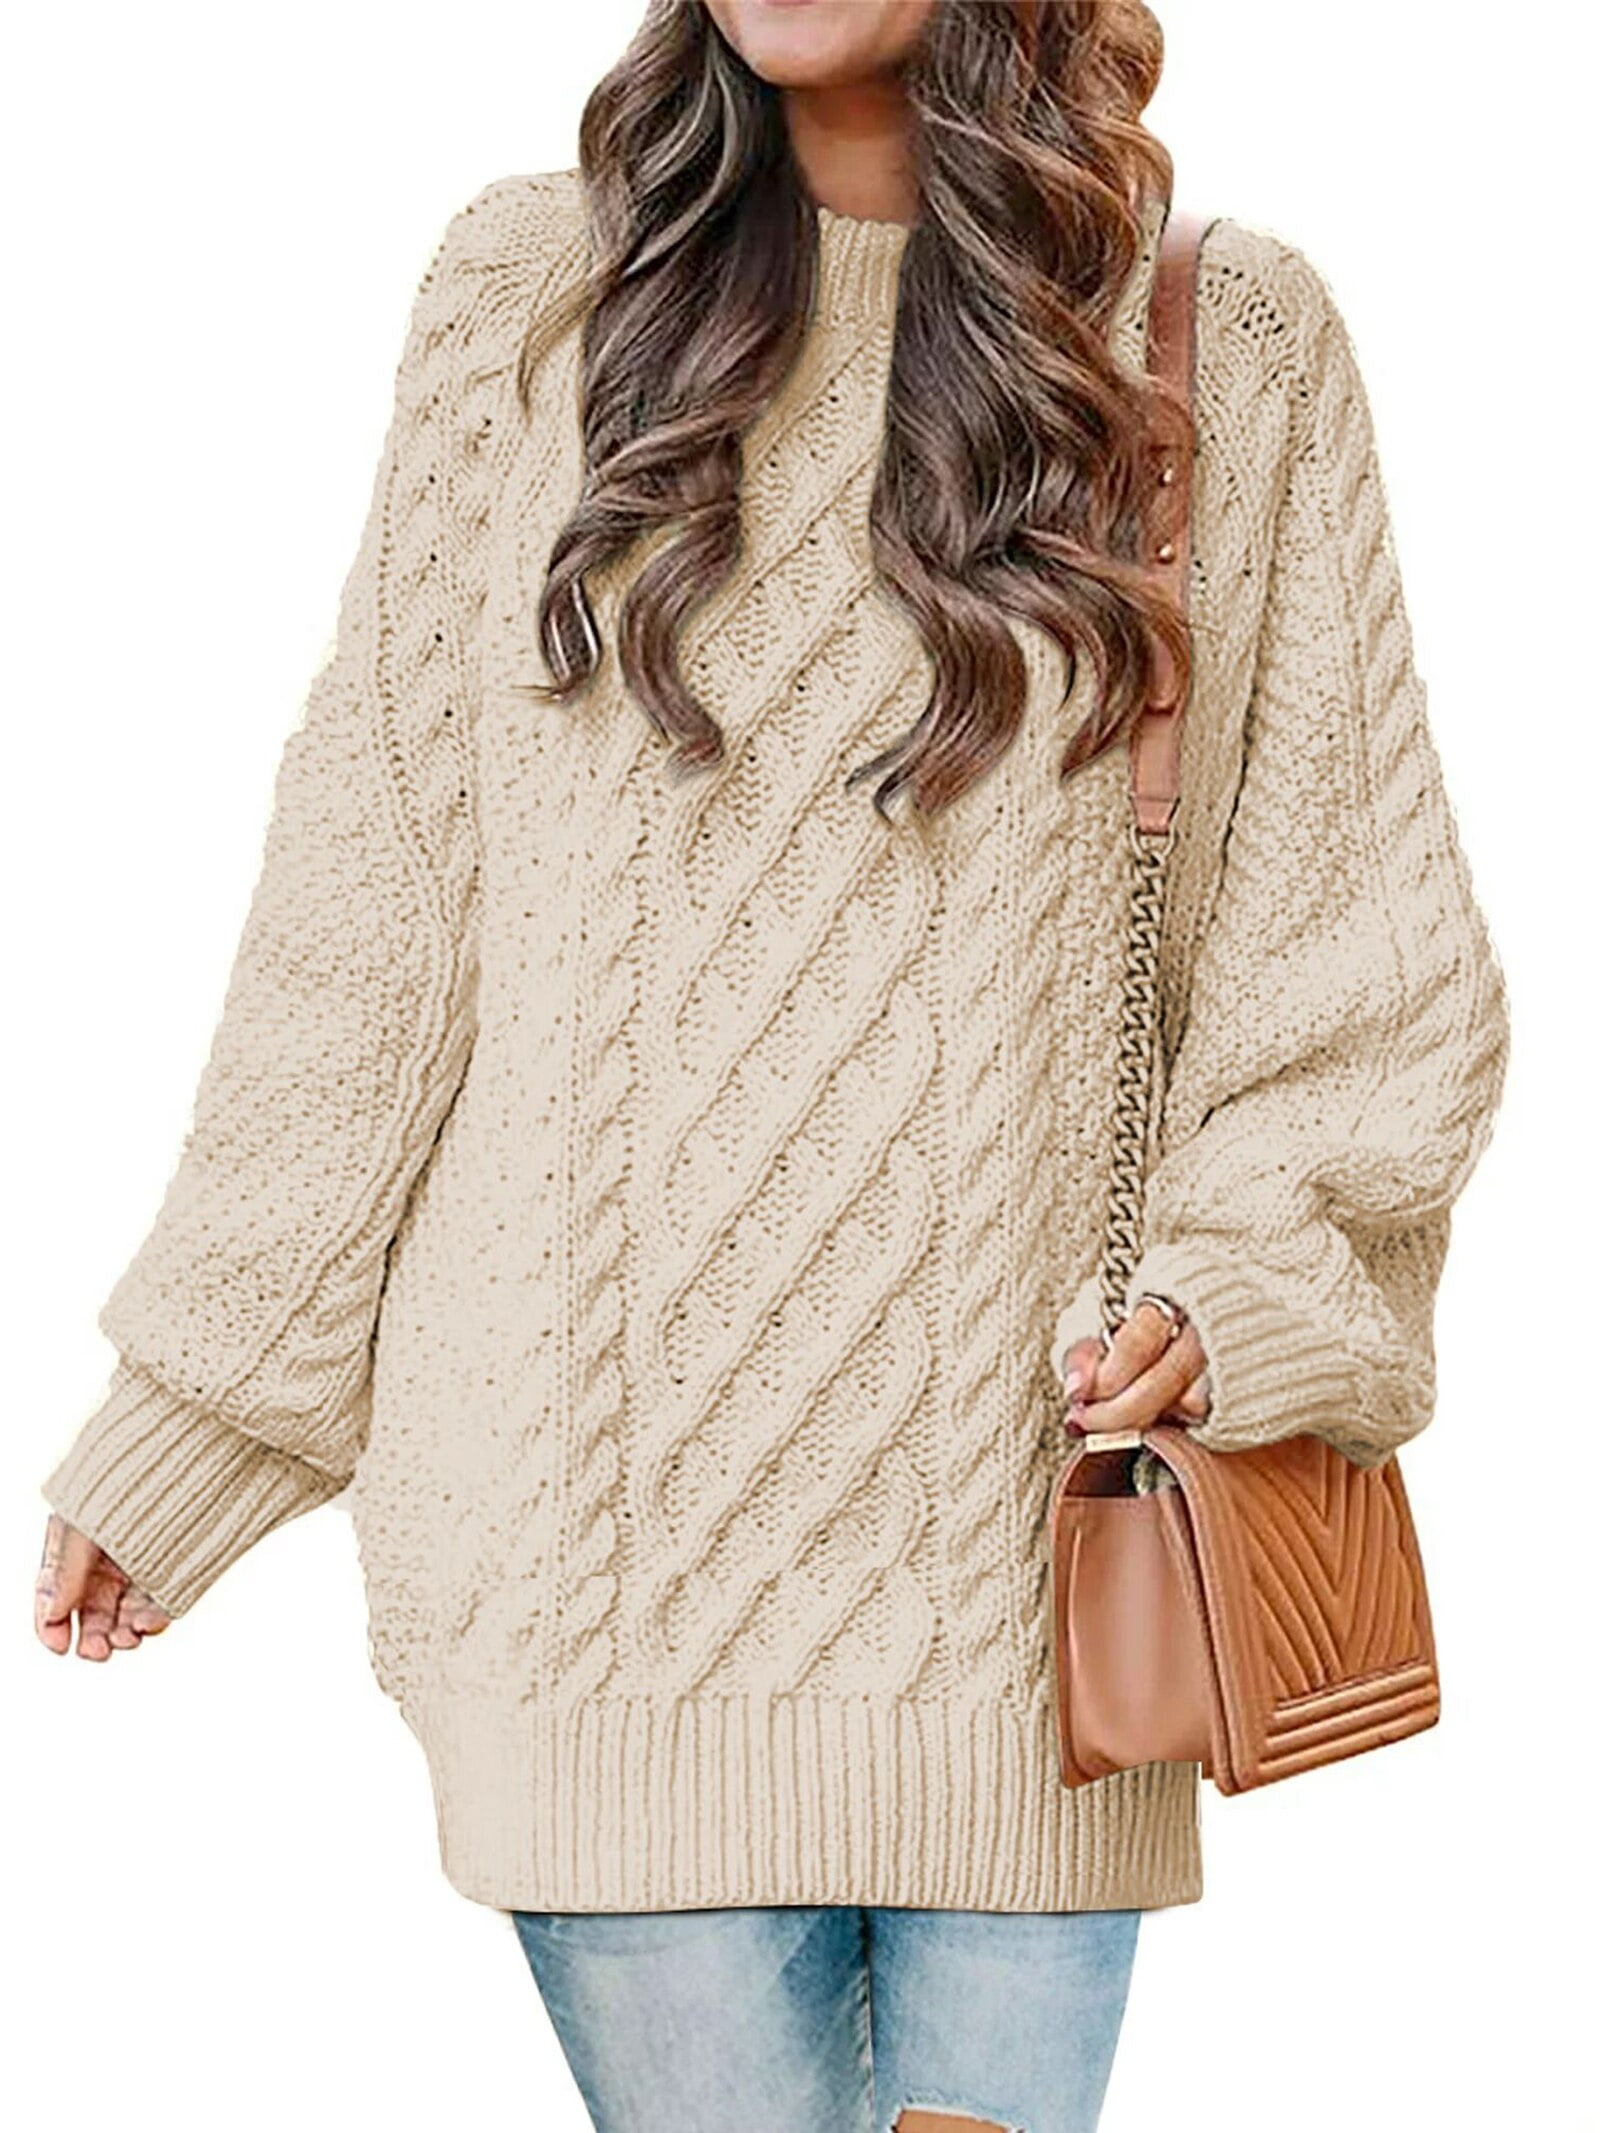 MOSHU Oversized Sweaters for Women Cable Knit Chunky Pullover Sweater 